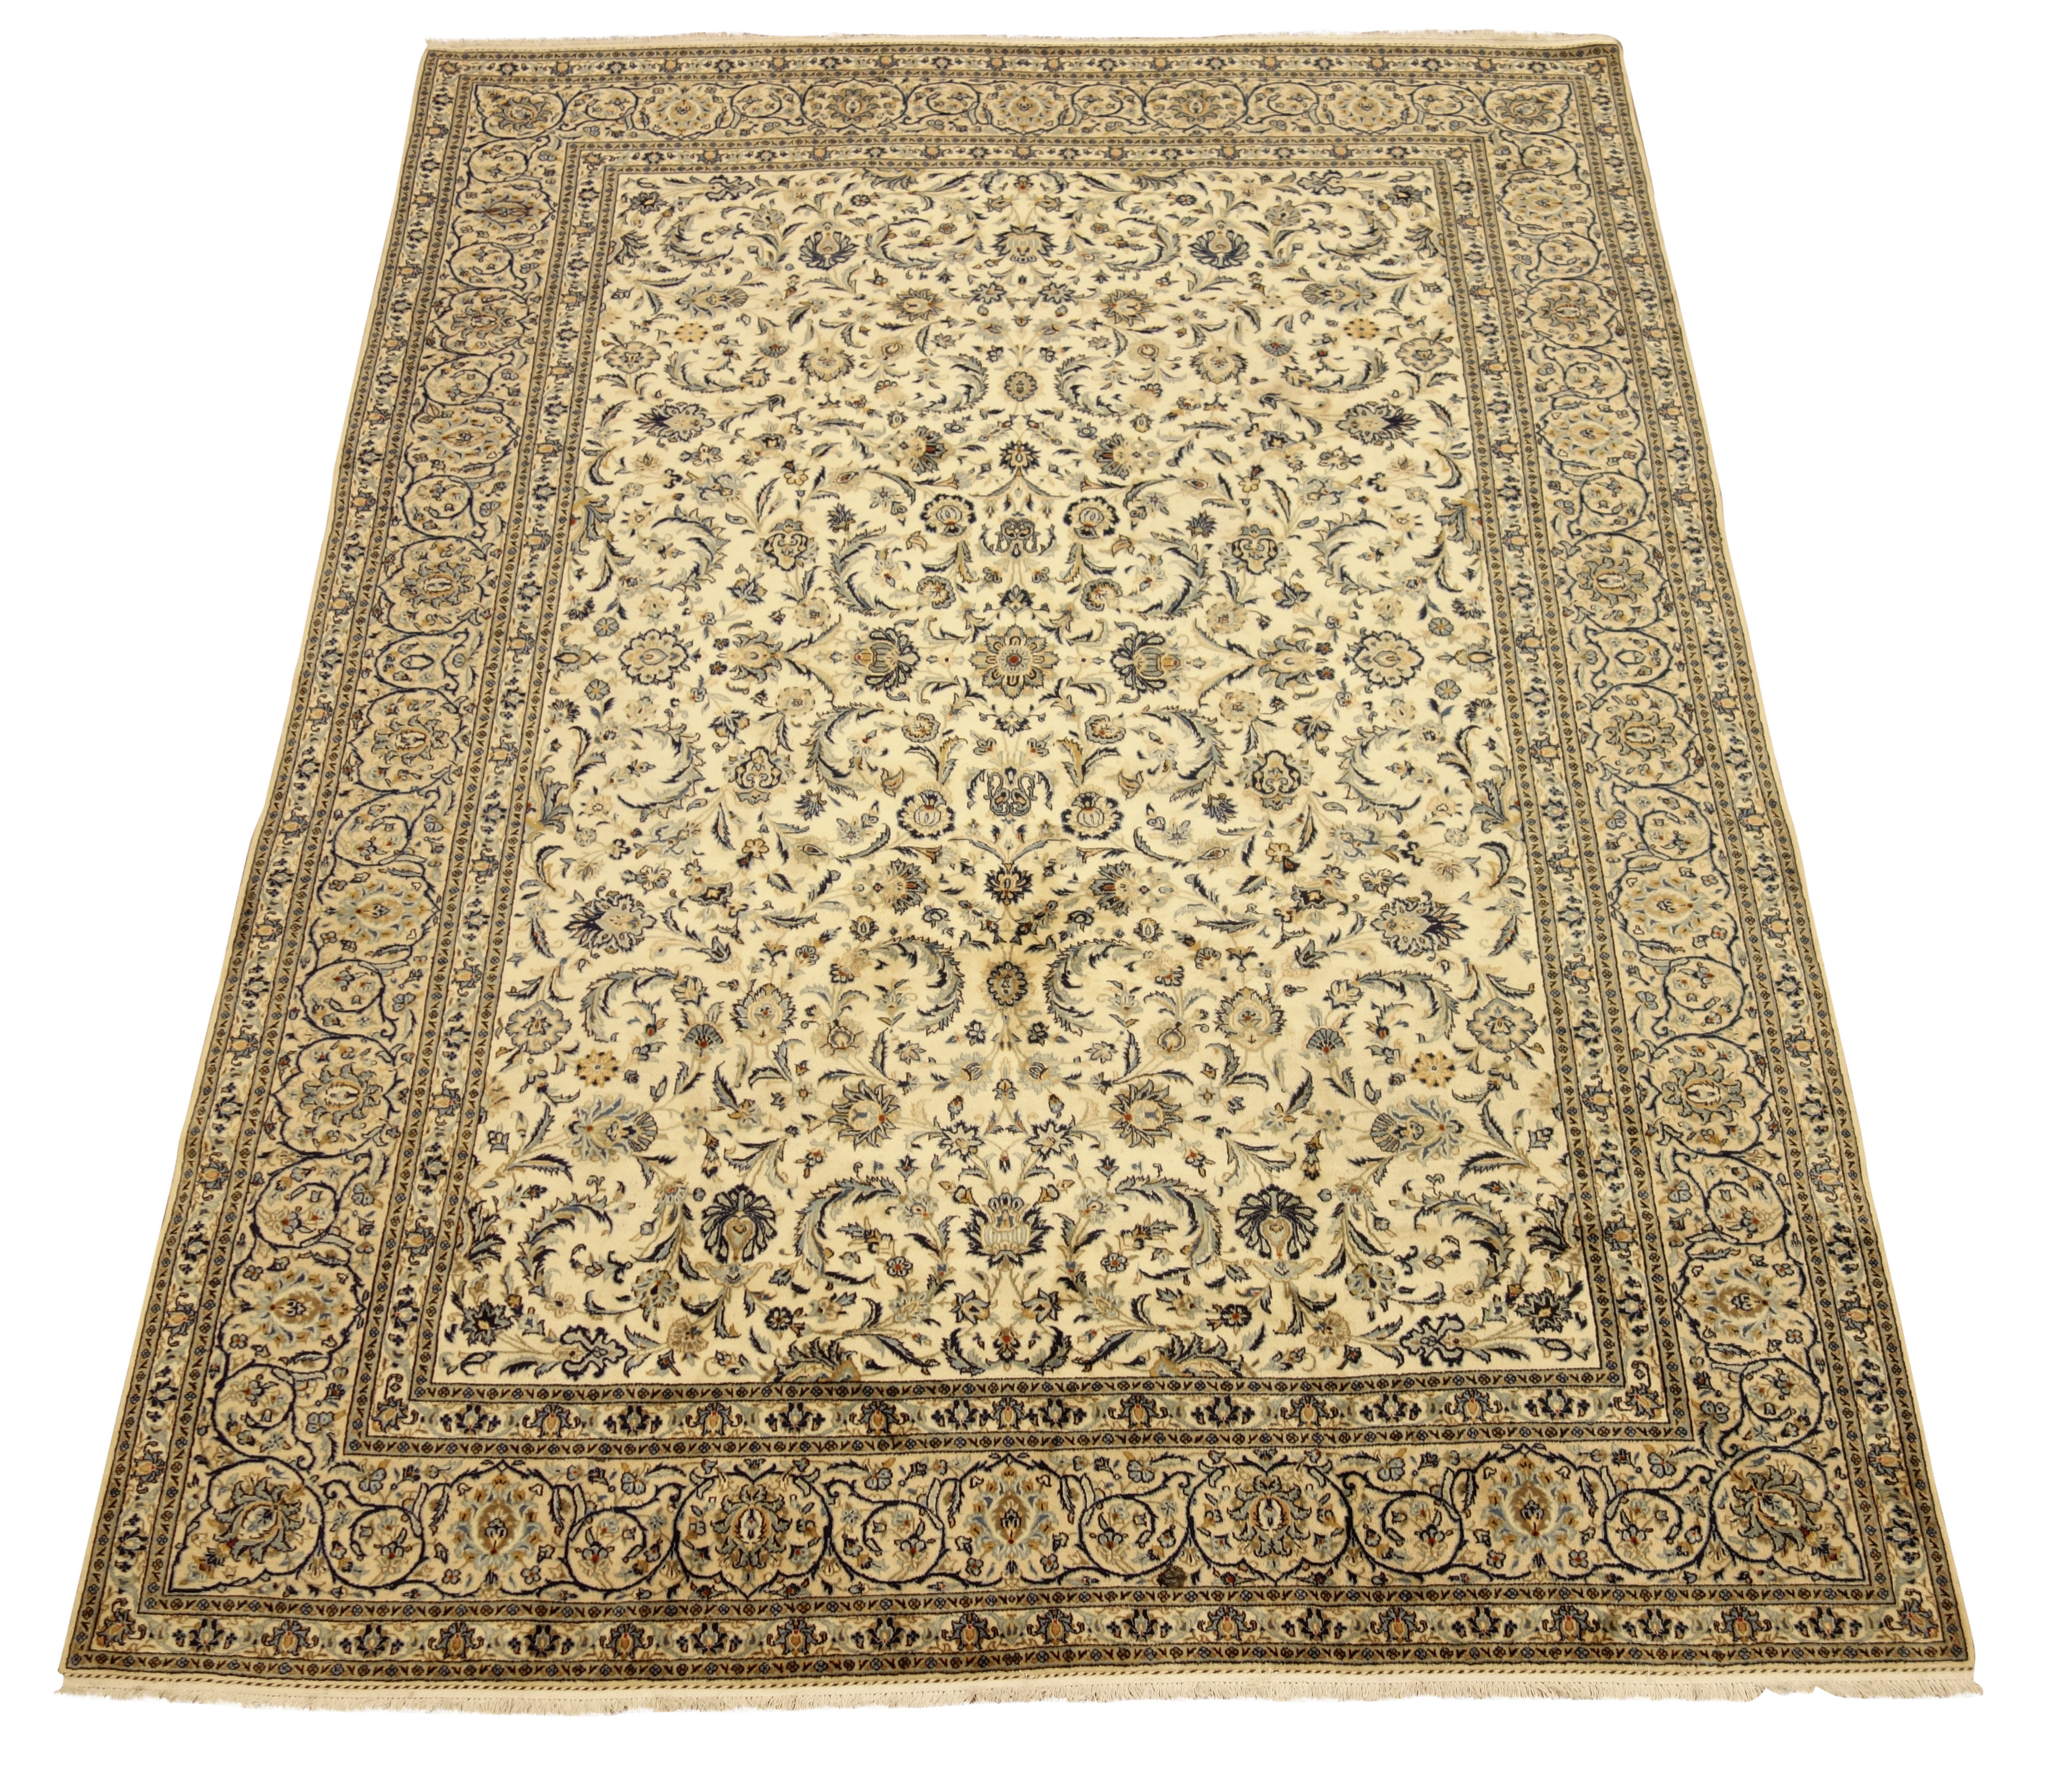 Persian Kashan carpet, ivory ground with blue interlacing overall design, repeating scroll border,